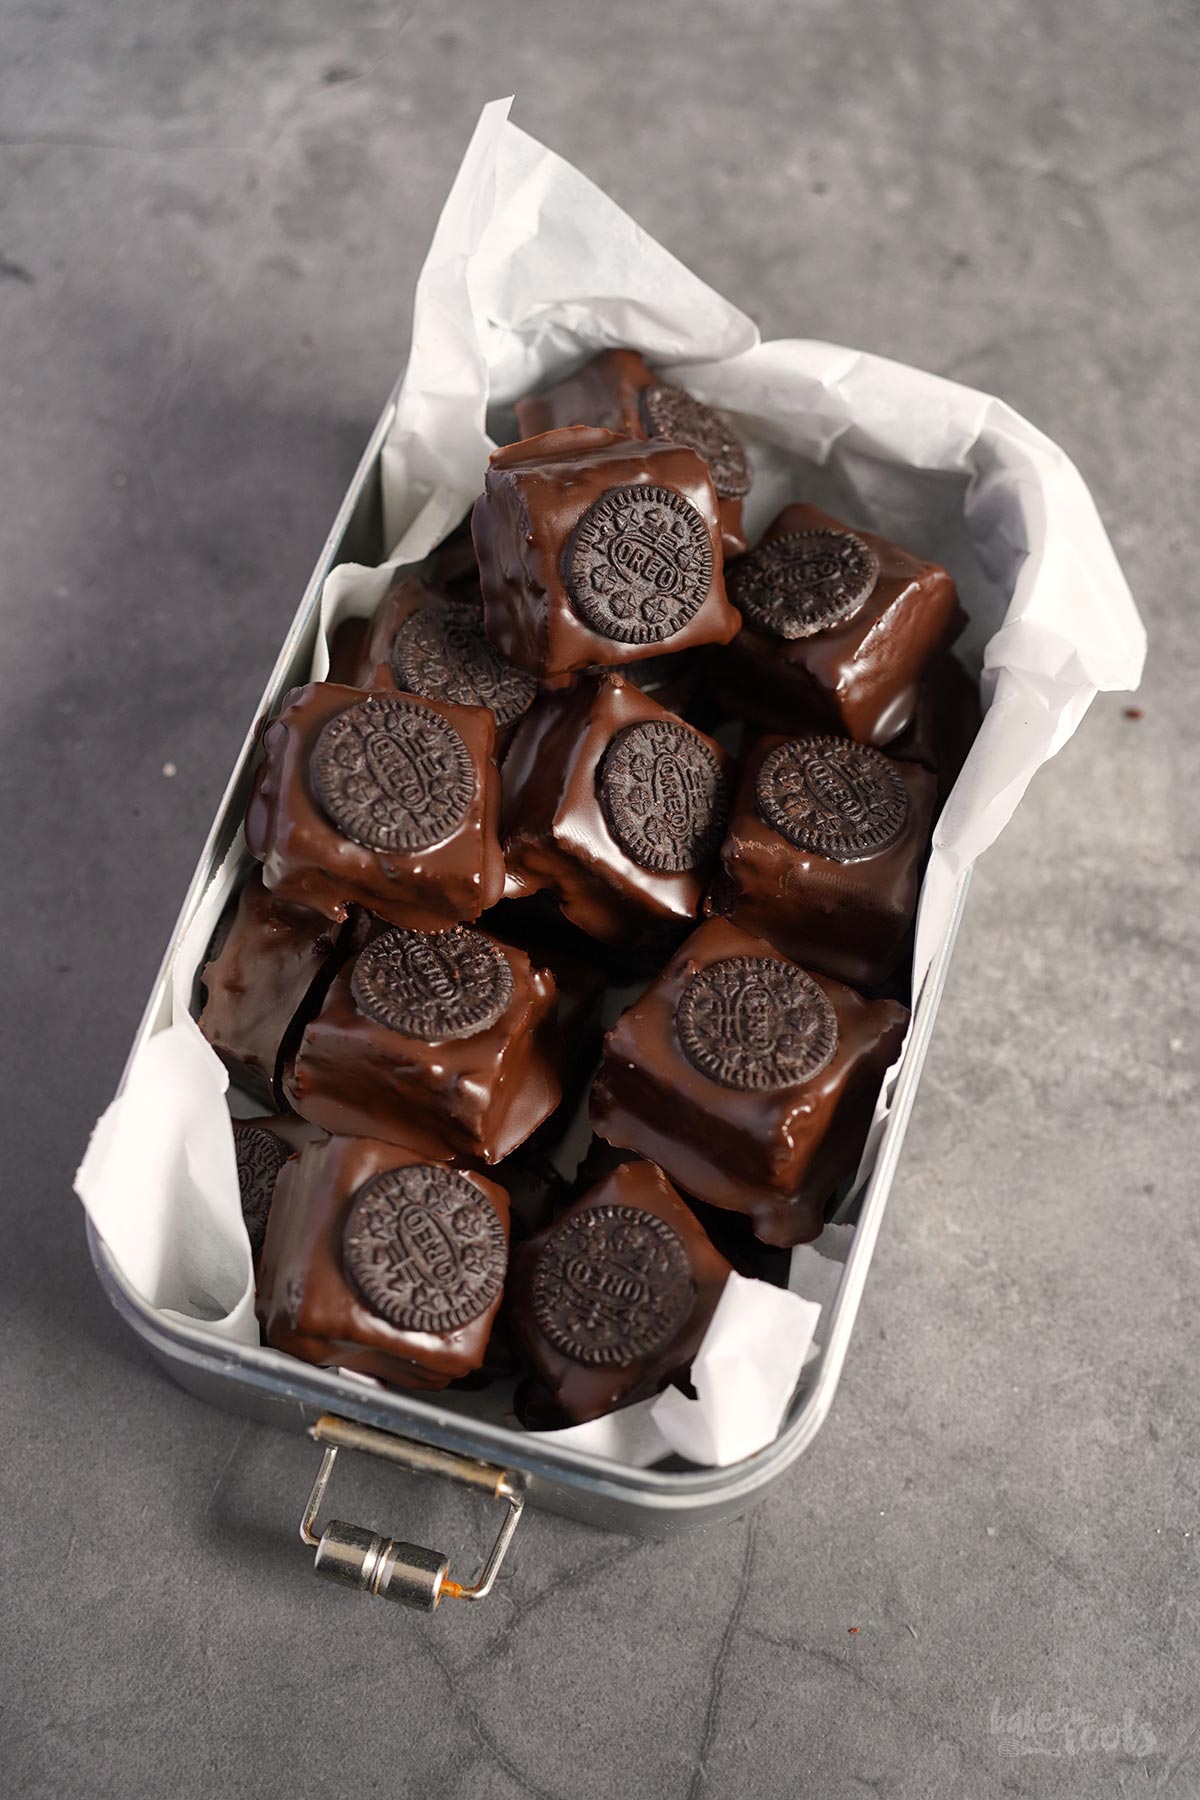 Oreo Brownie Pralinen | Bake to the roots